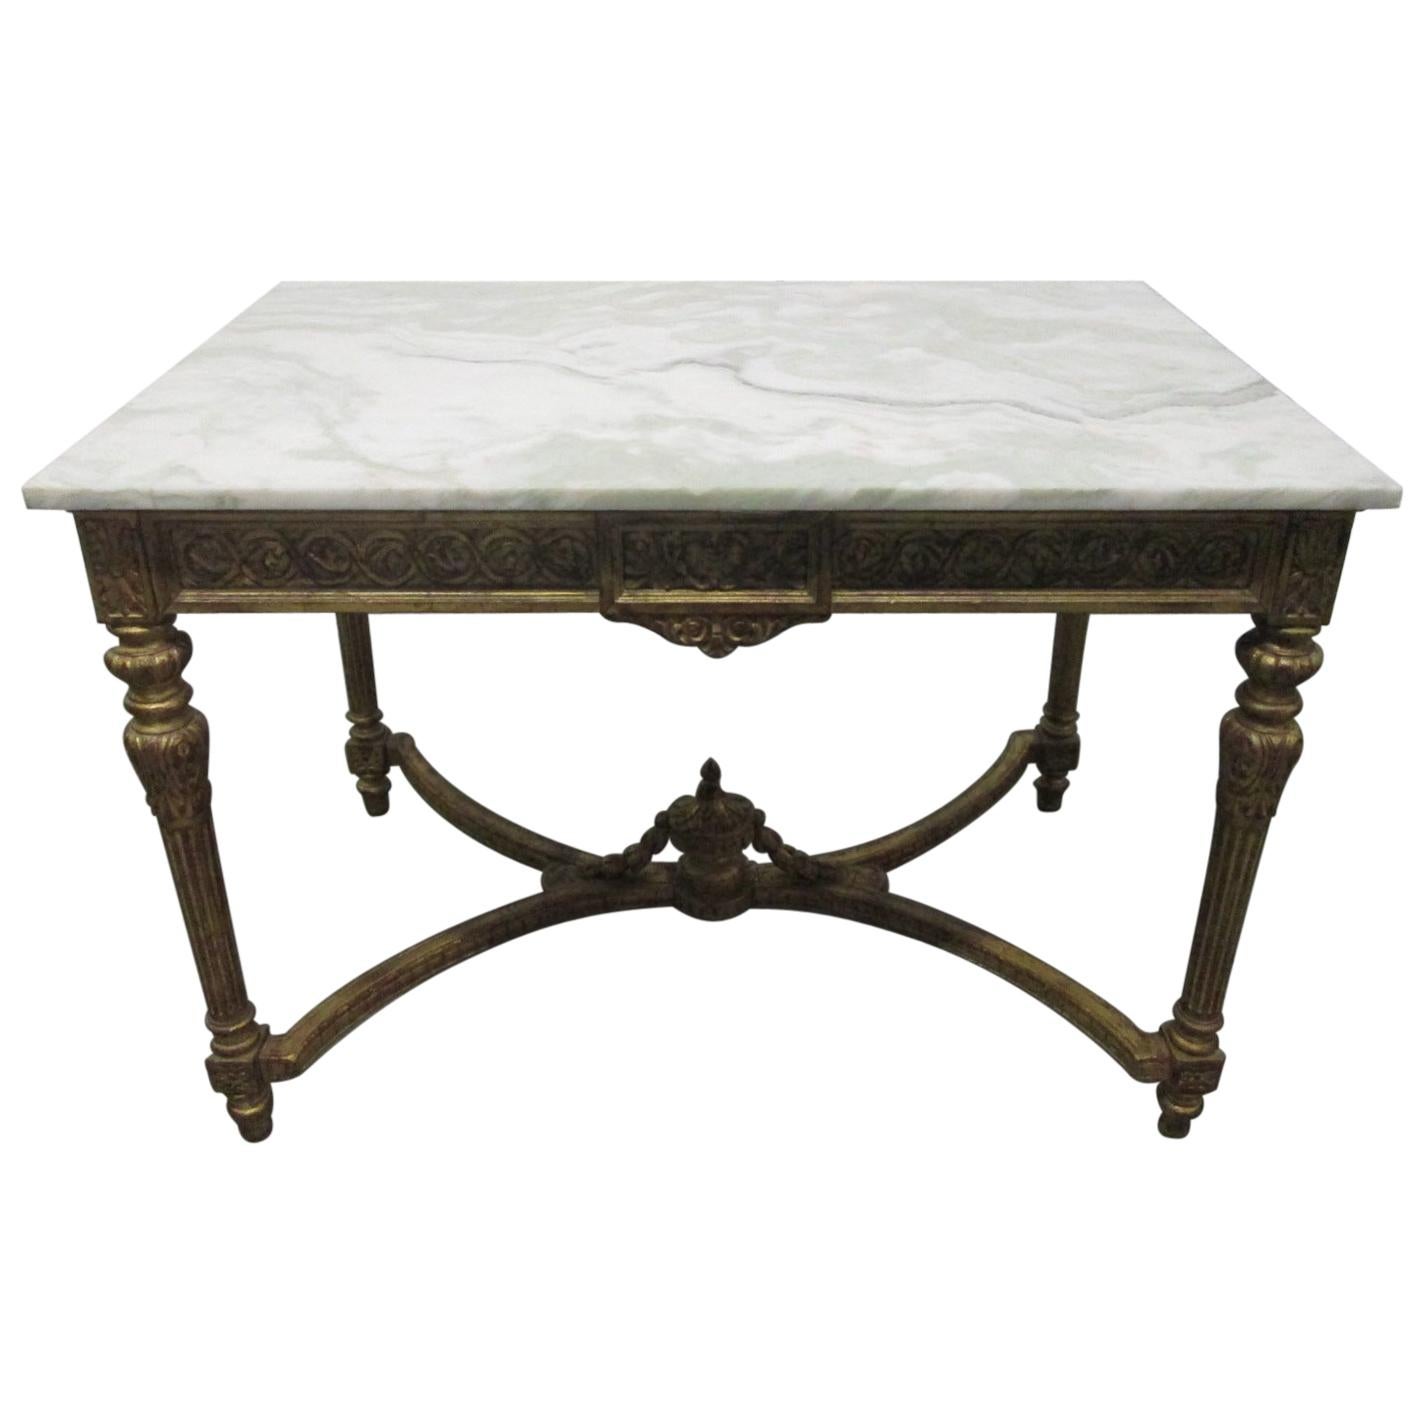 19th Century Italian Neoclassical Gilt Carved Marble-Top Table For Sale